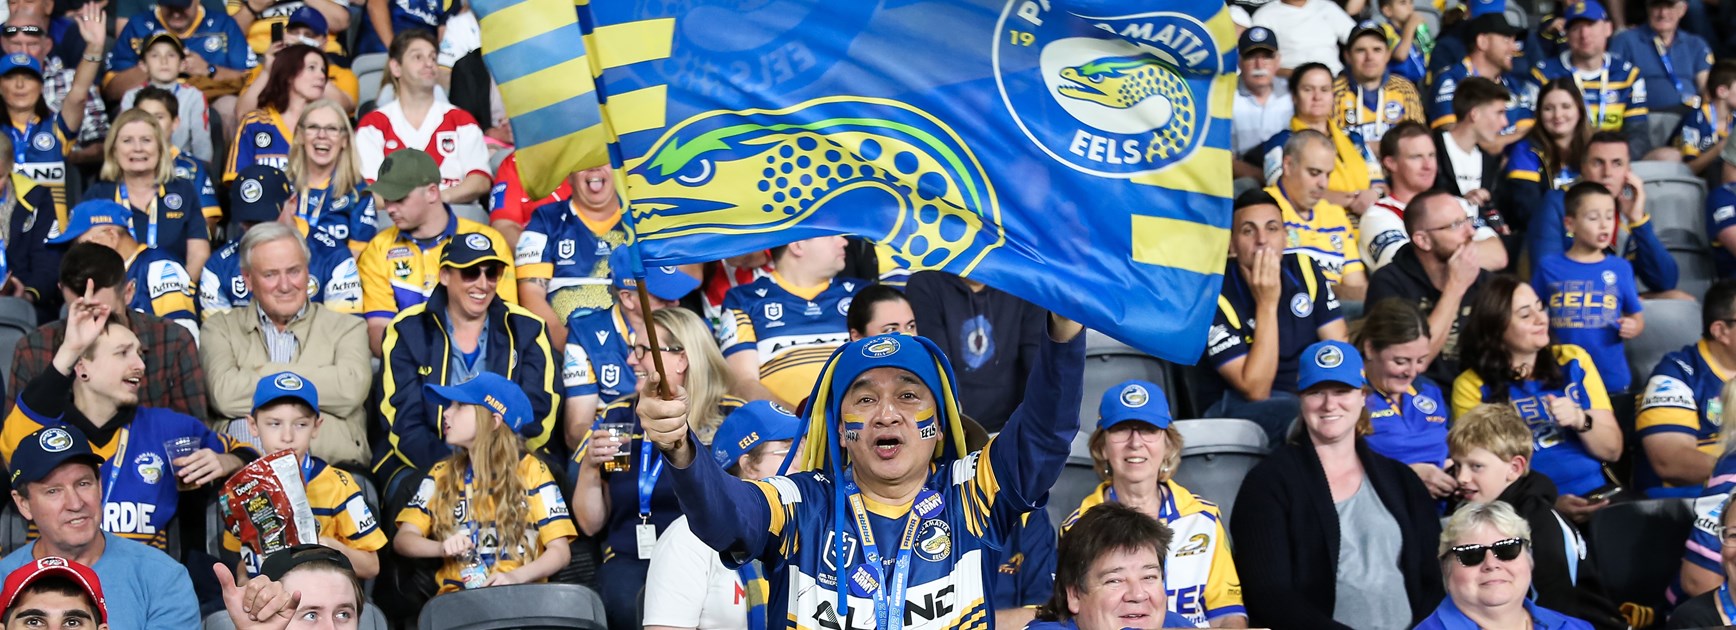 Eels to celebrate Members' Appreciation Round